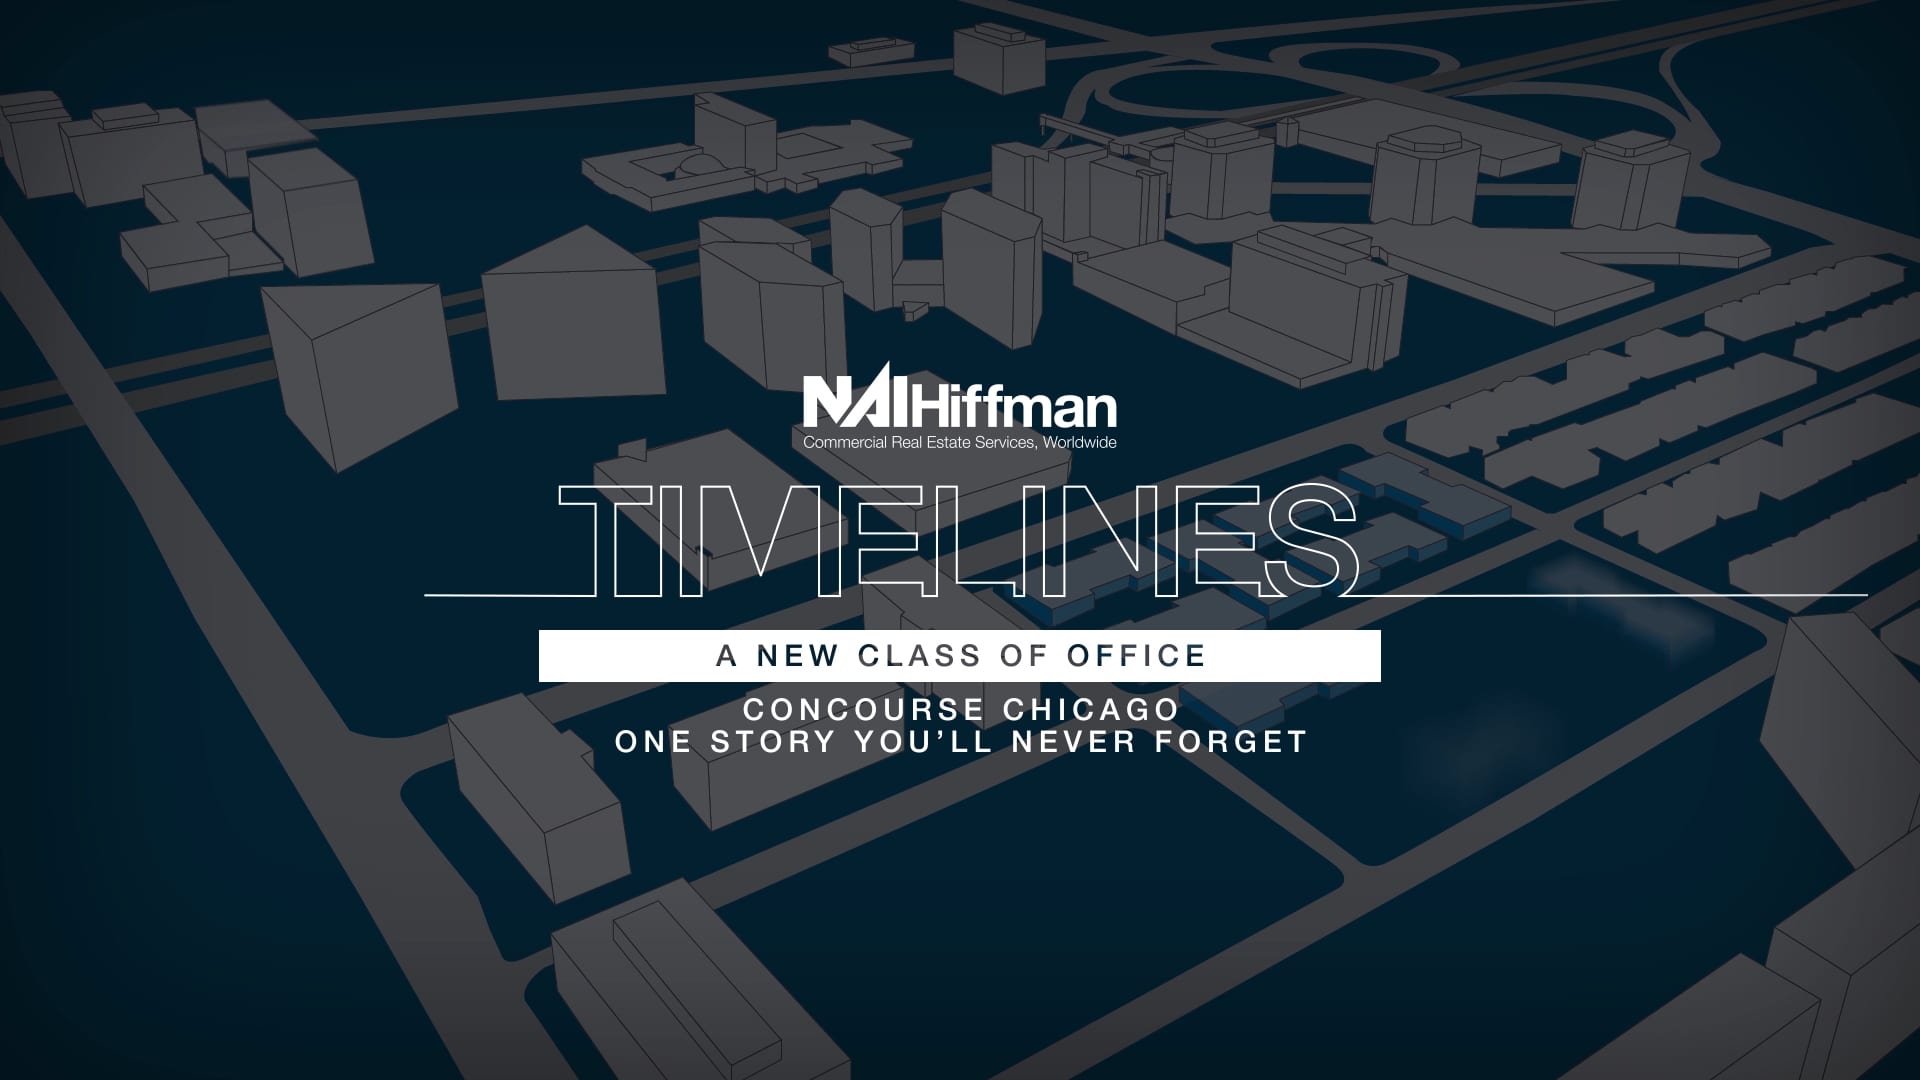 NAI Hiffman Timelines: Revolutionizing Single-Story Office at Concourse Chicago